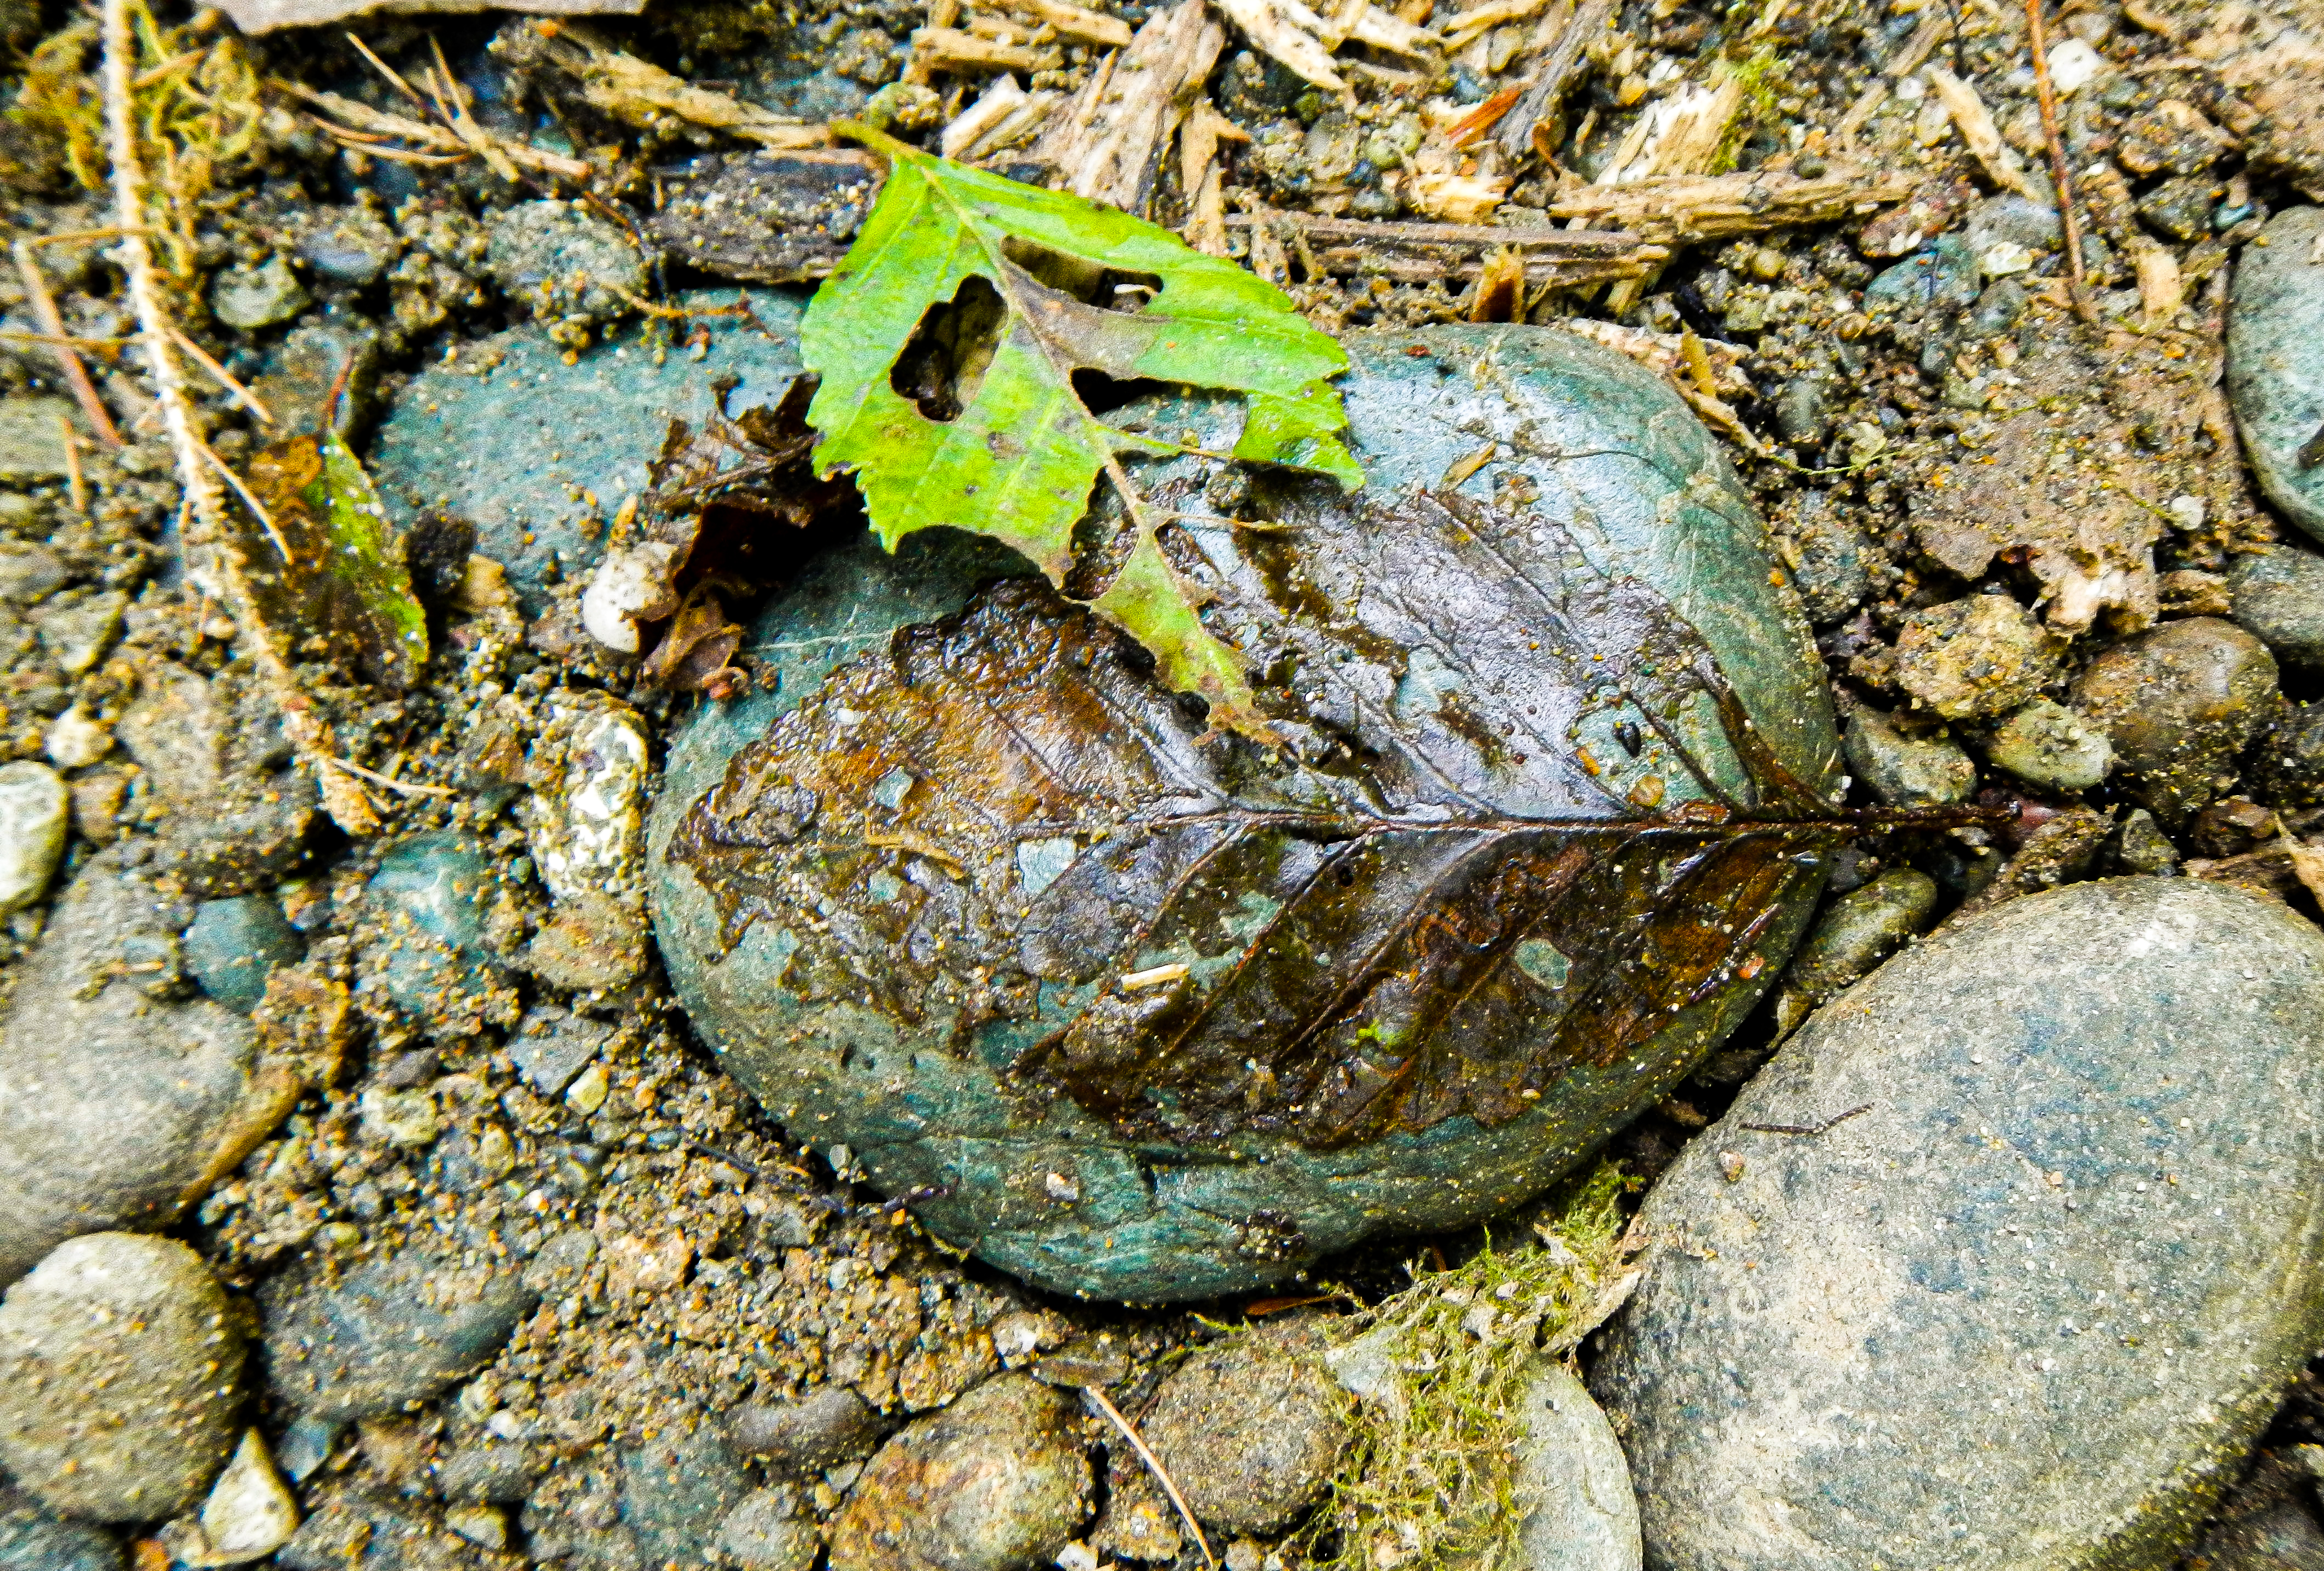 a leaf decaying on a rock with other minerals and organic matter in the scene